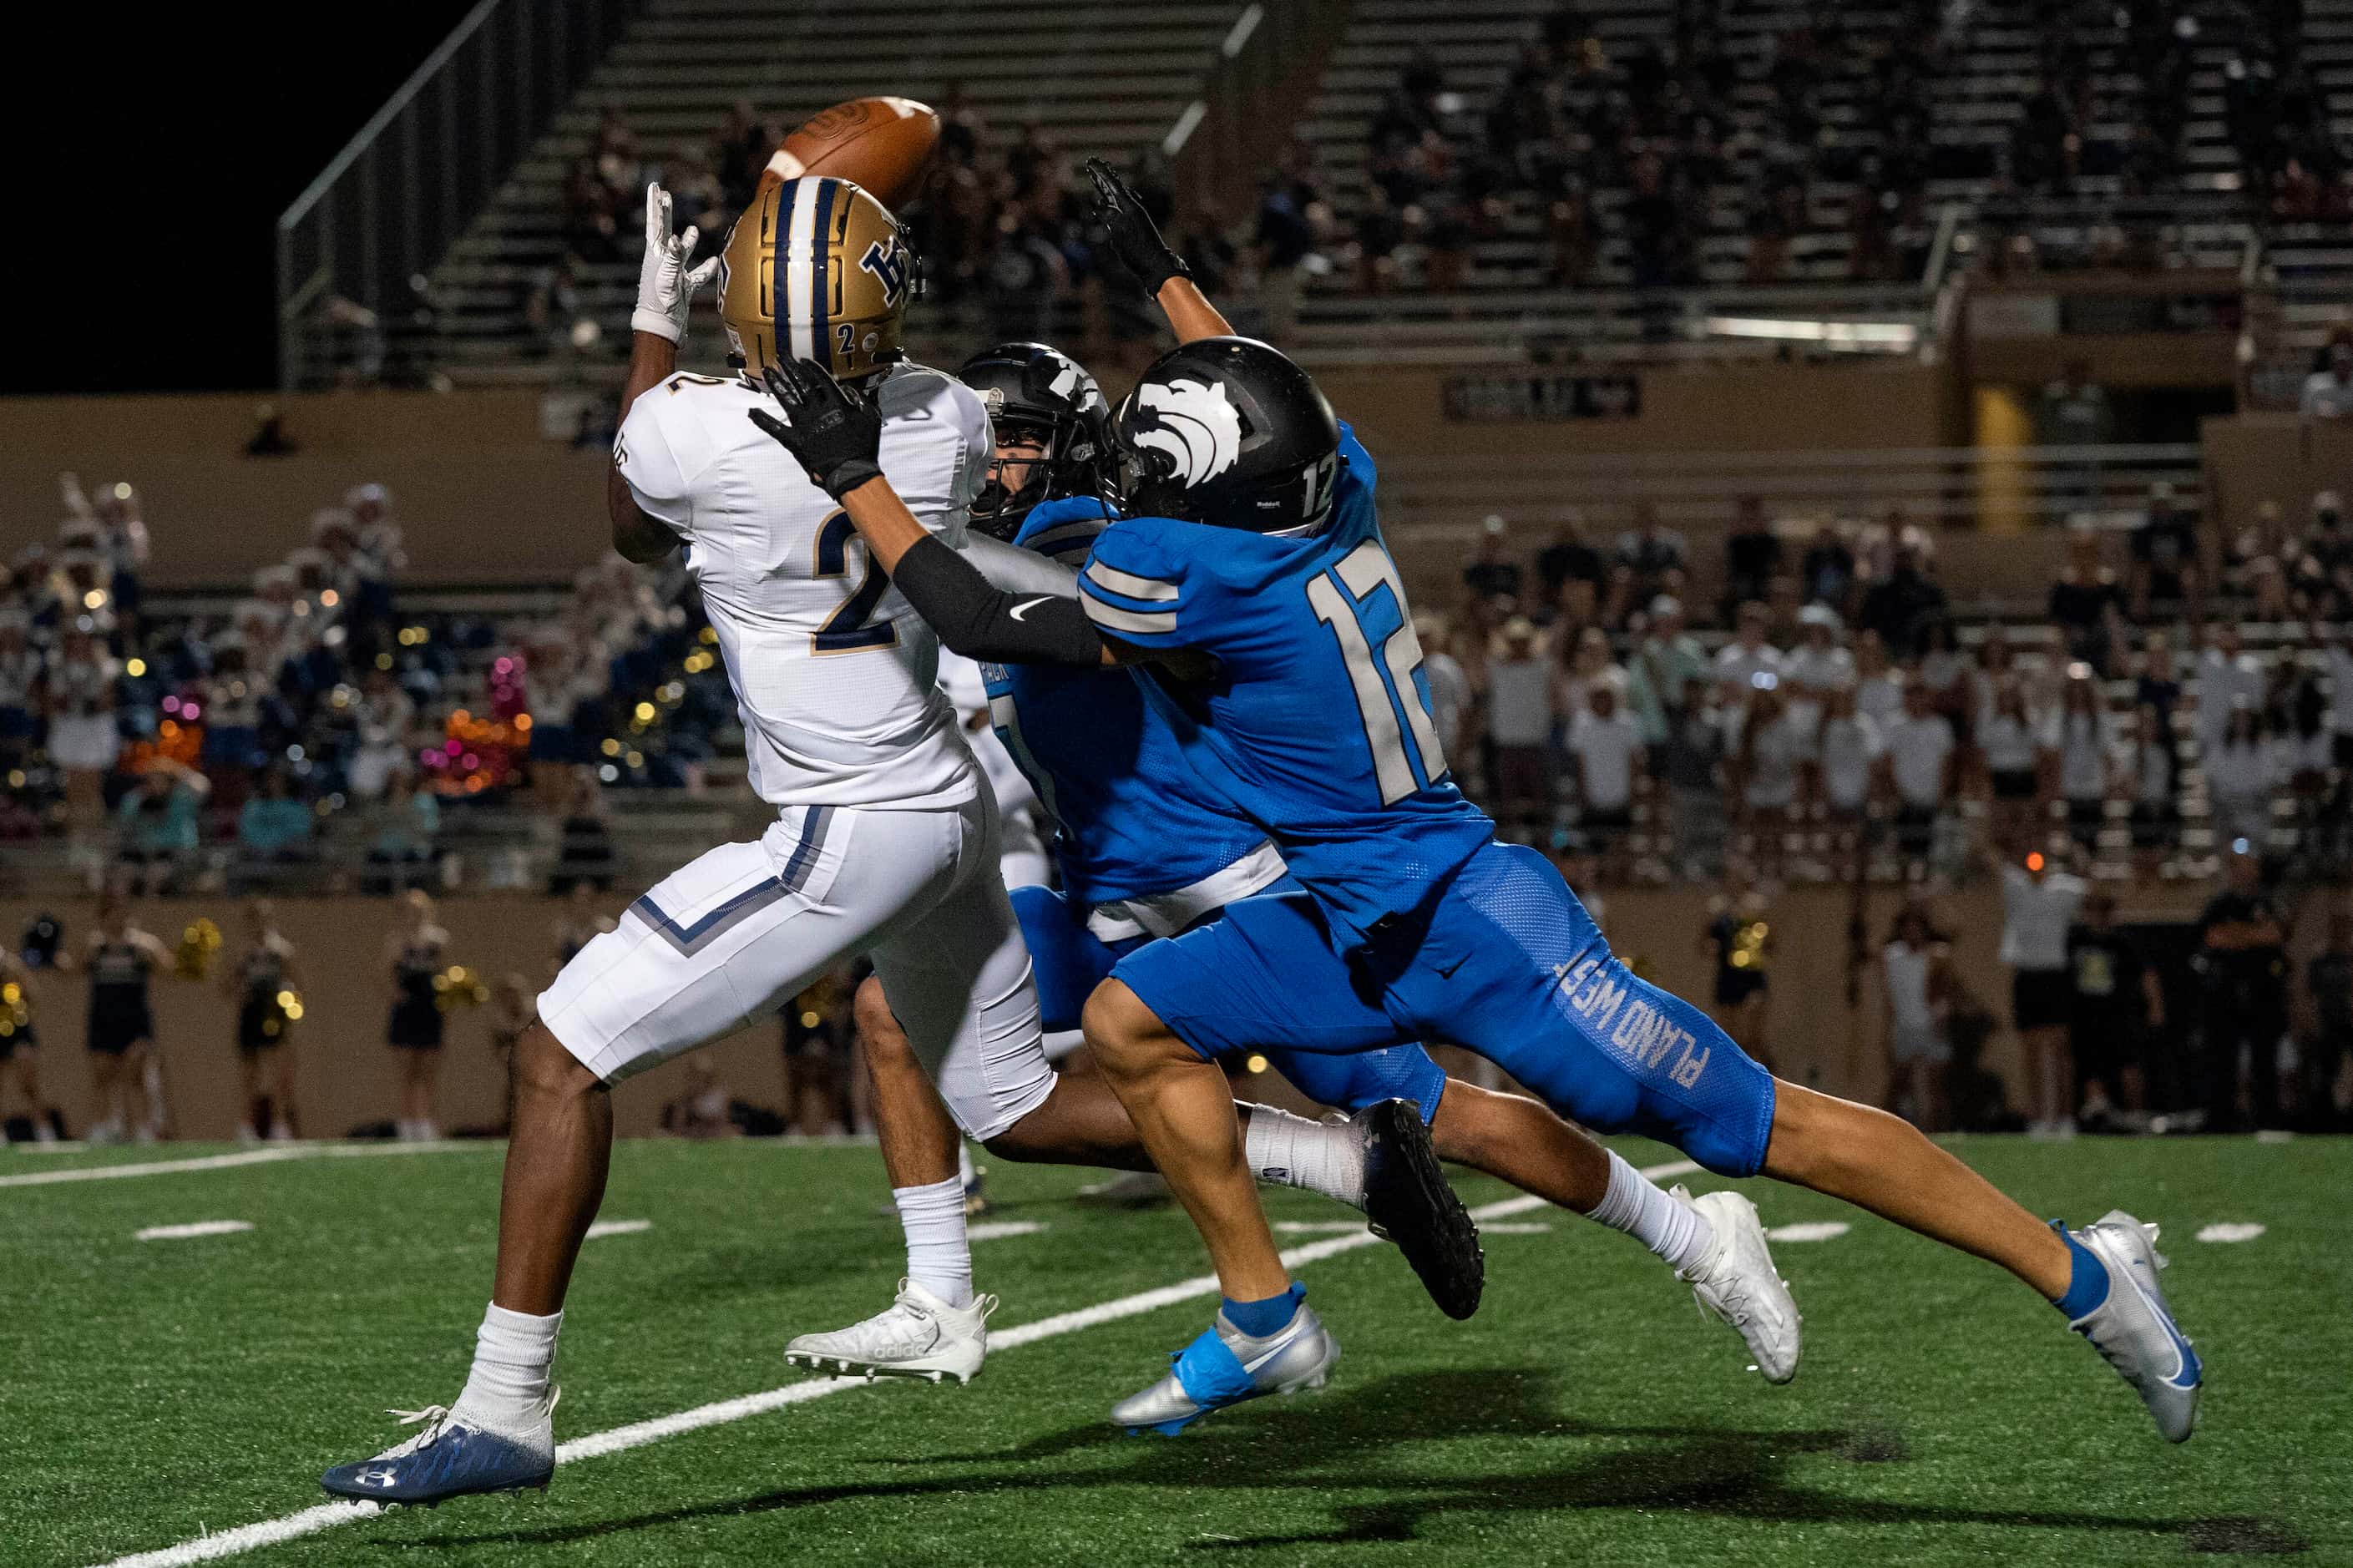 Little Elm senior wide receiver Dylan Evans (2) makes a catch in front of Plano West junior...